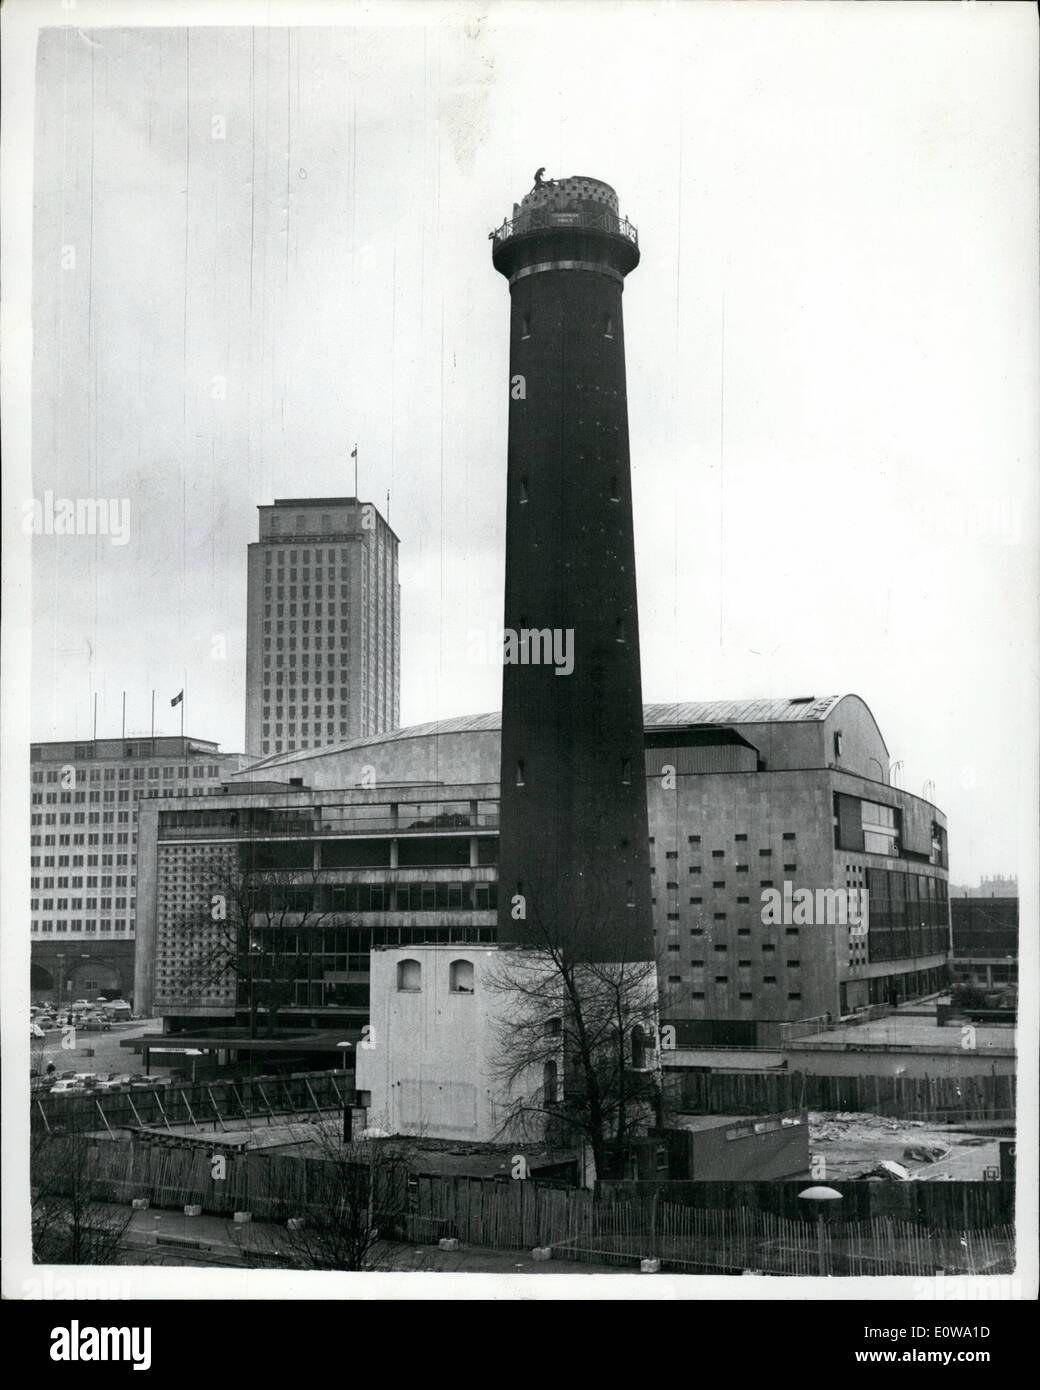 Mar. 03, 1962 - Famous London Landmark Starts To Come Down. Demolition of The South Bank Shot Tower. One of the most famous of London's Landmarks - the Shot Tower at South Bank - is now being demolished - to make room for a new concert hall.. The Tower is 200 ft. tall - and the walls at the base are about three feet thick. It was built 136 years ago - by David Riddall. Stock Photo